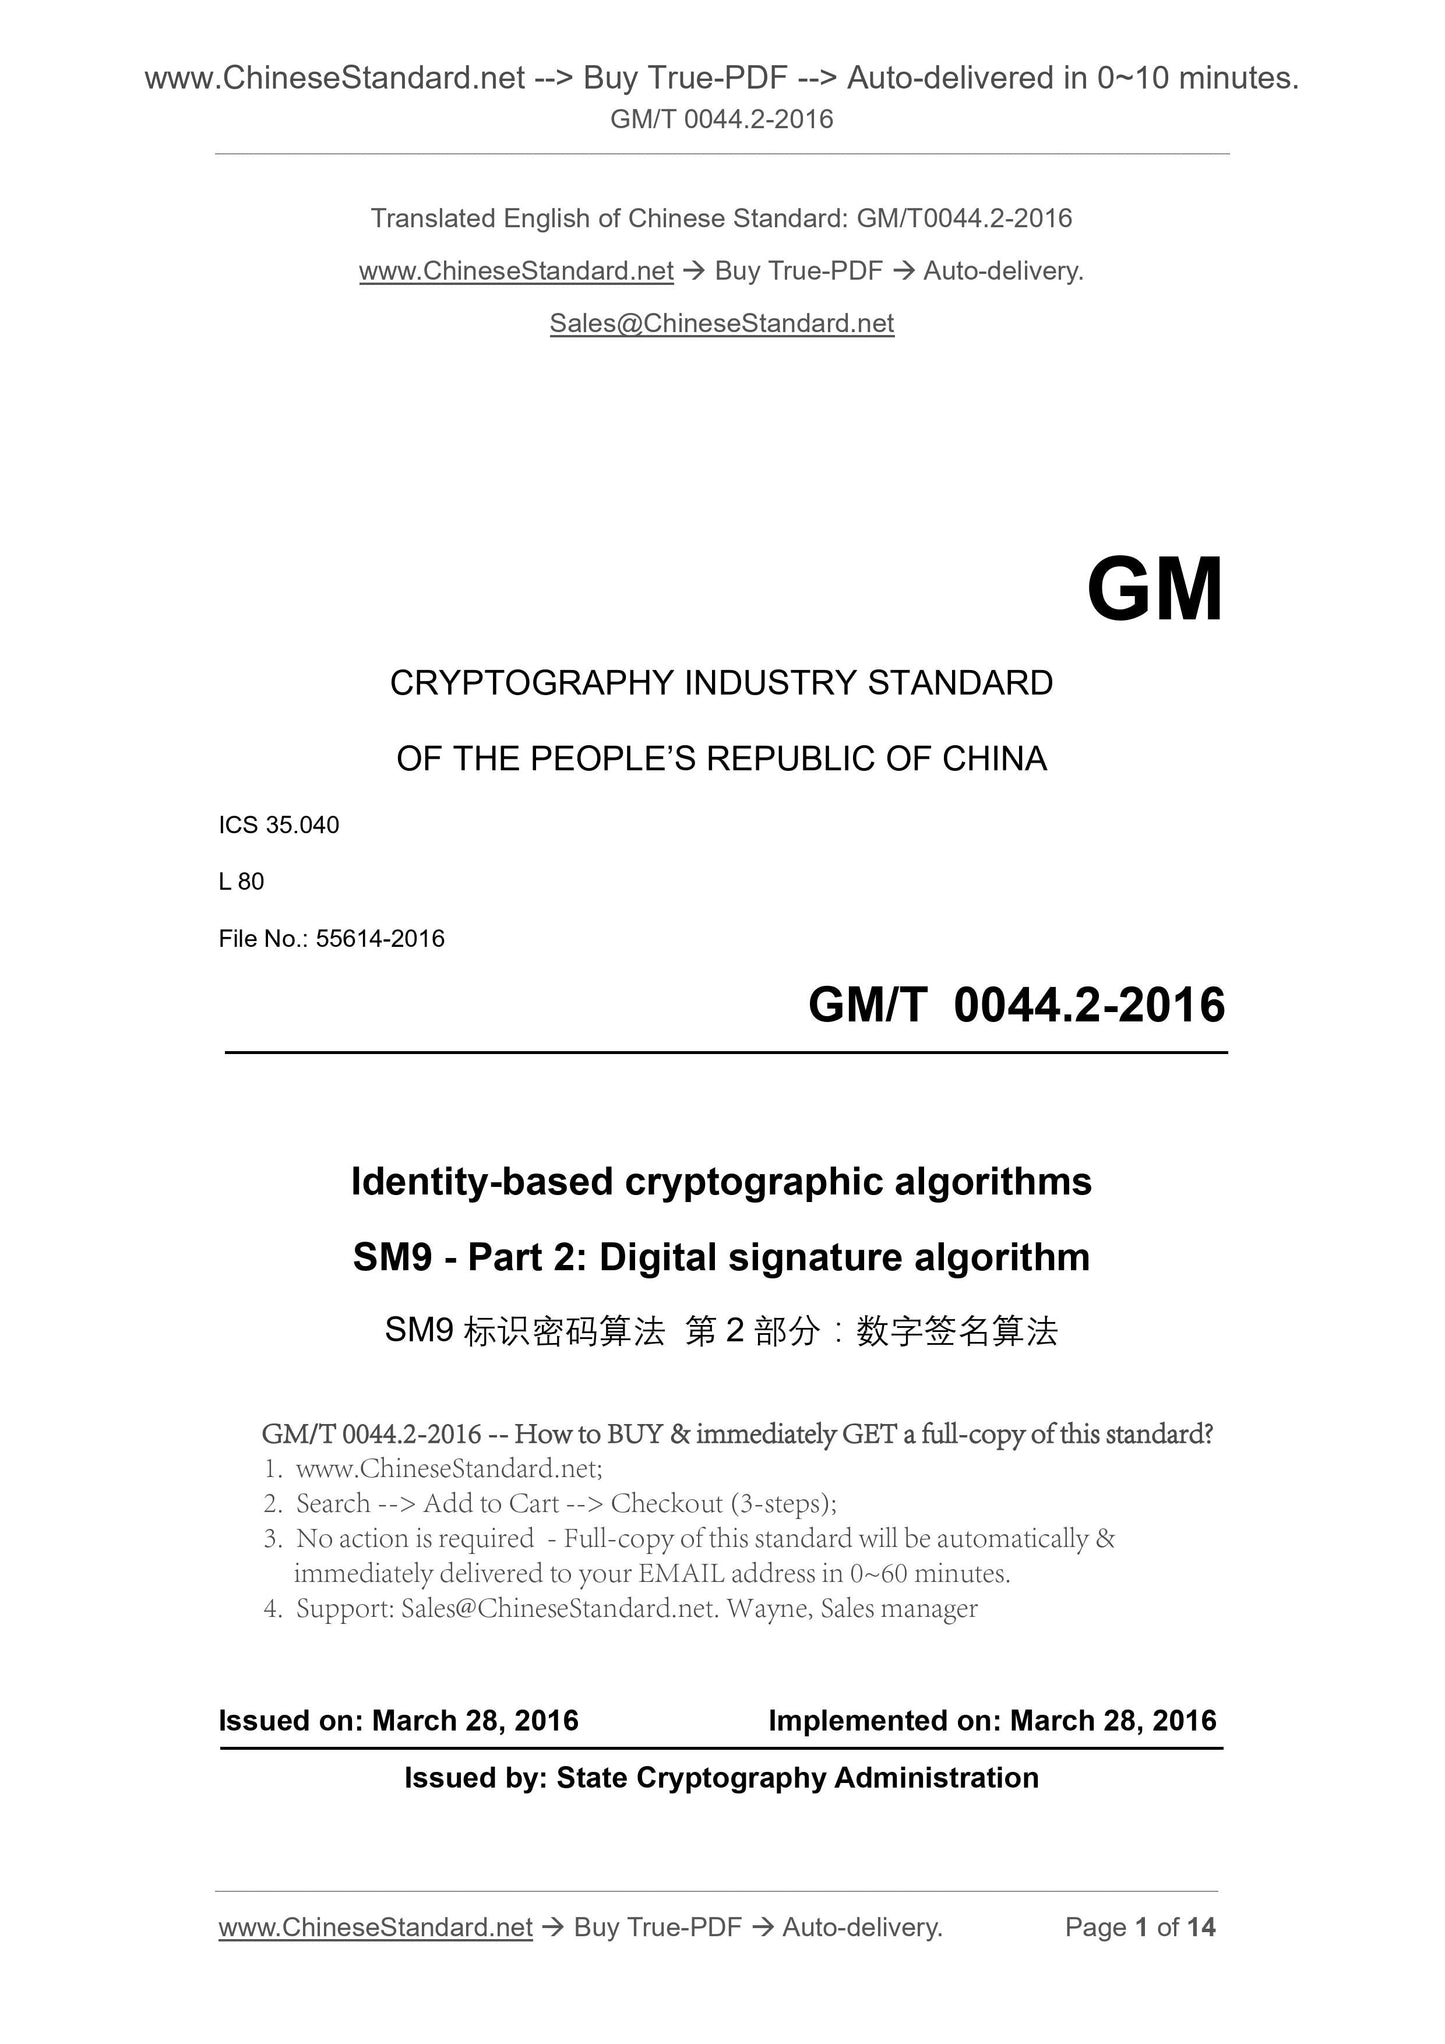 GM/T 0044.2-2016 Page 1